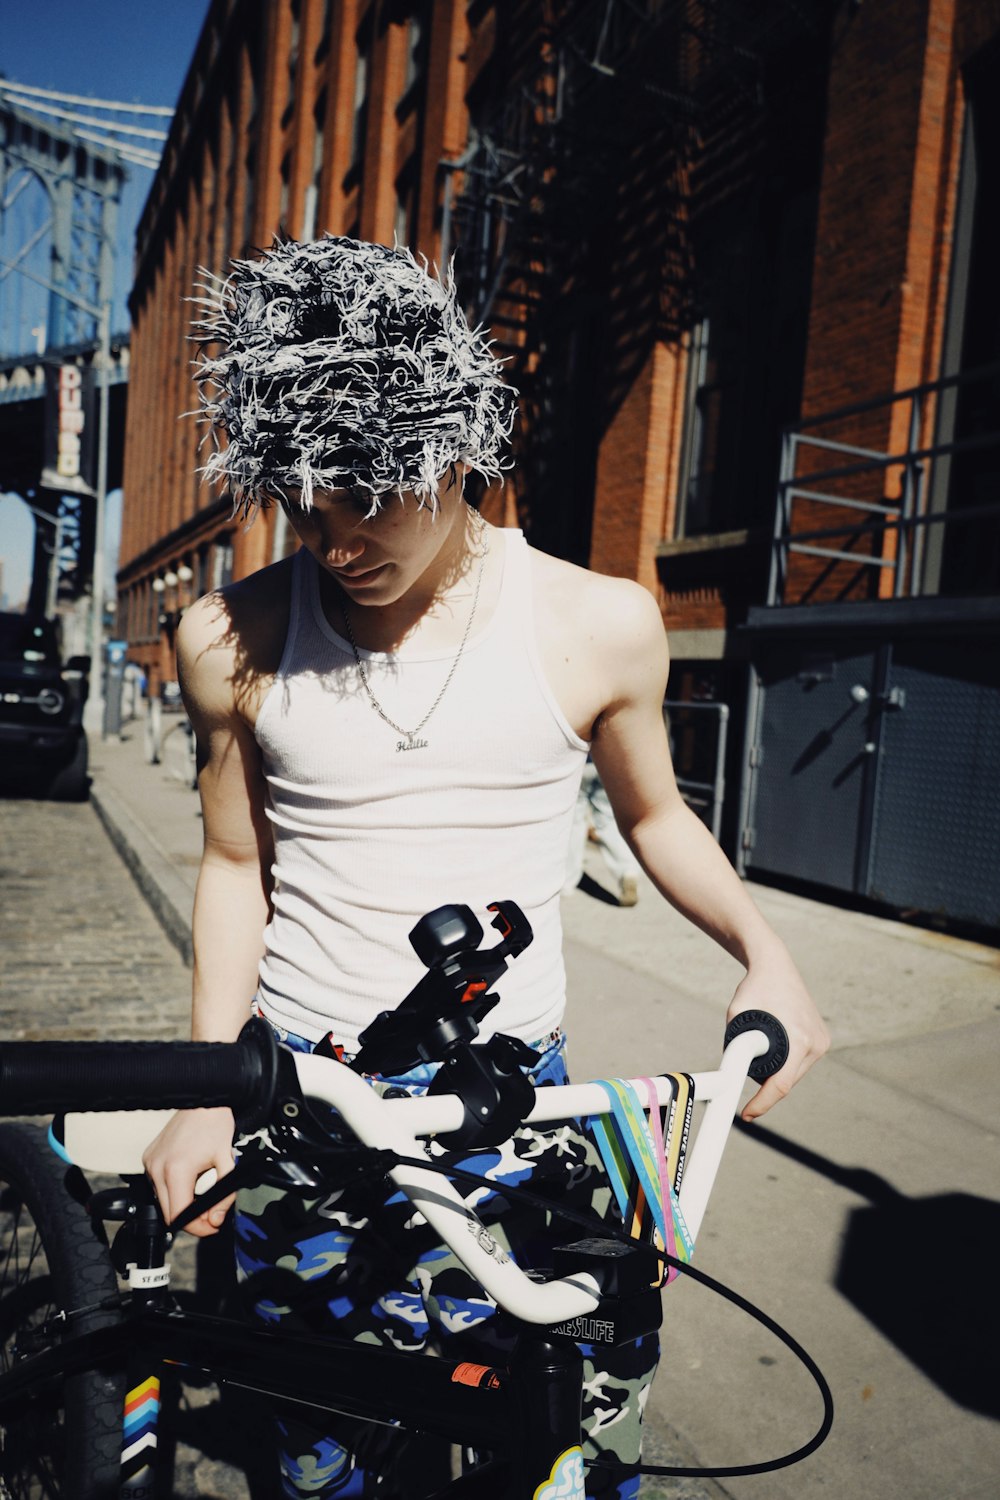 a man standing next to a bike with a bunch of hair on his head